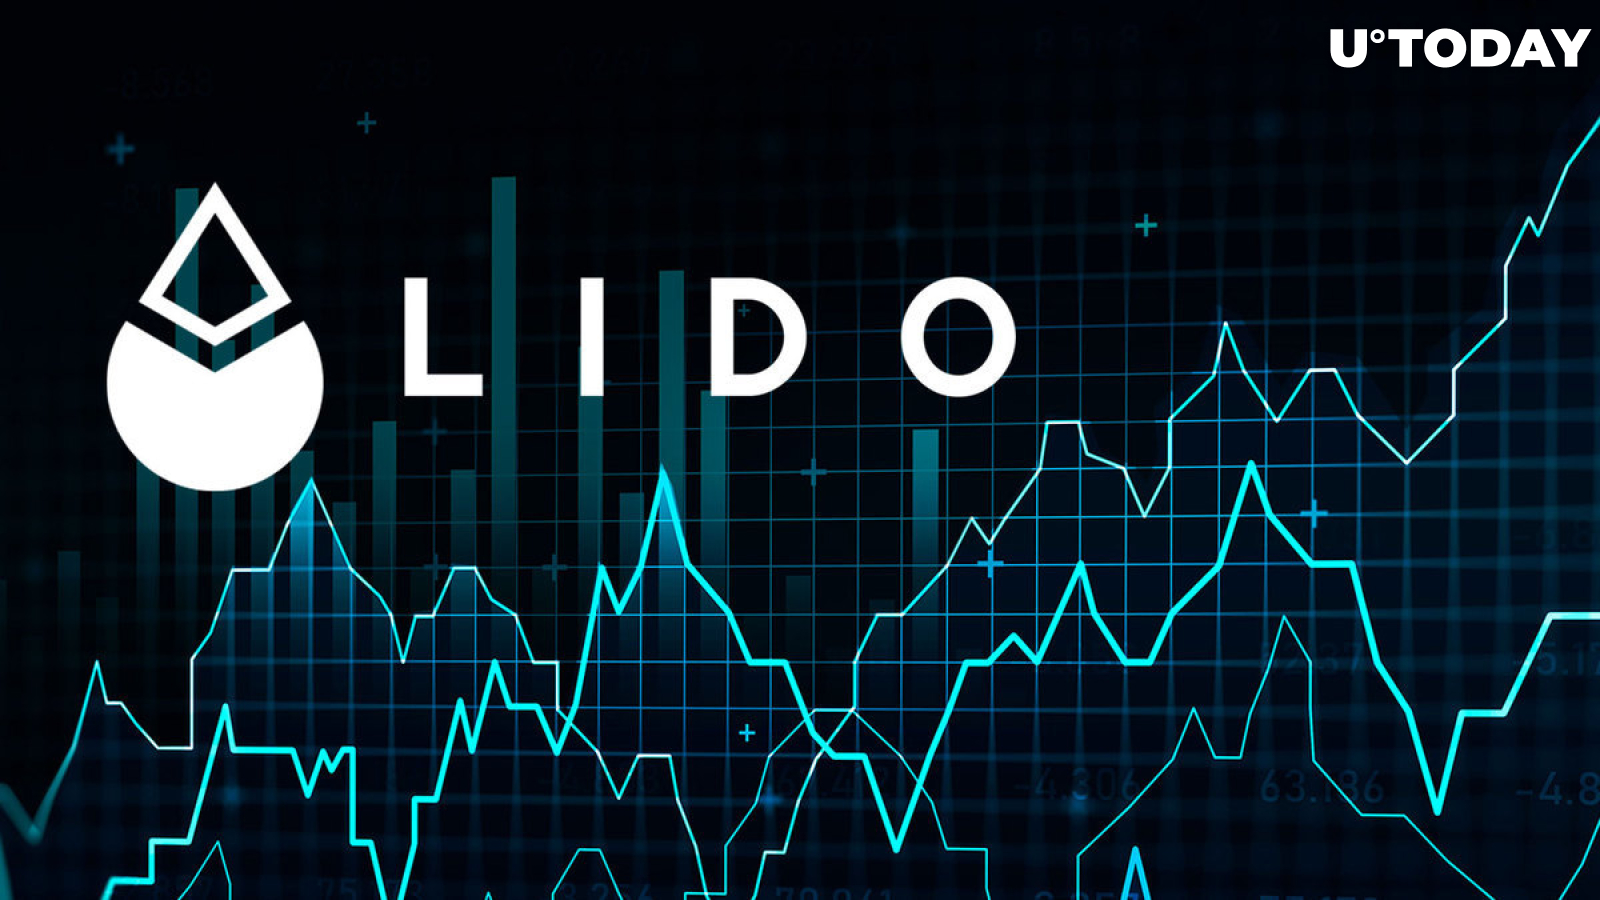 Lido DAO (LDO) Breaks Record With Largest Transaction in Years Worth $135 Million